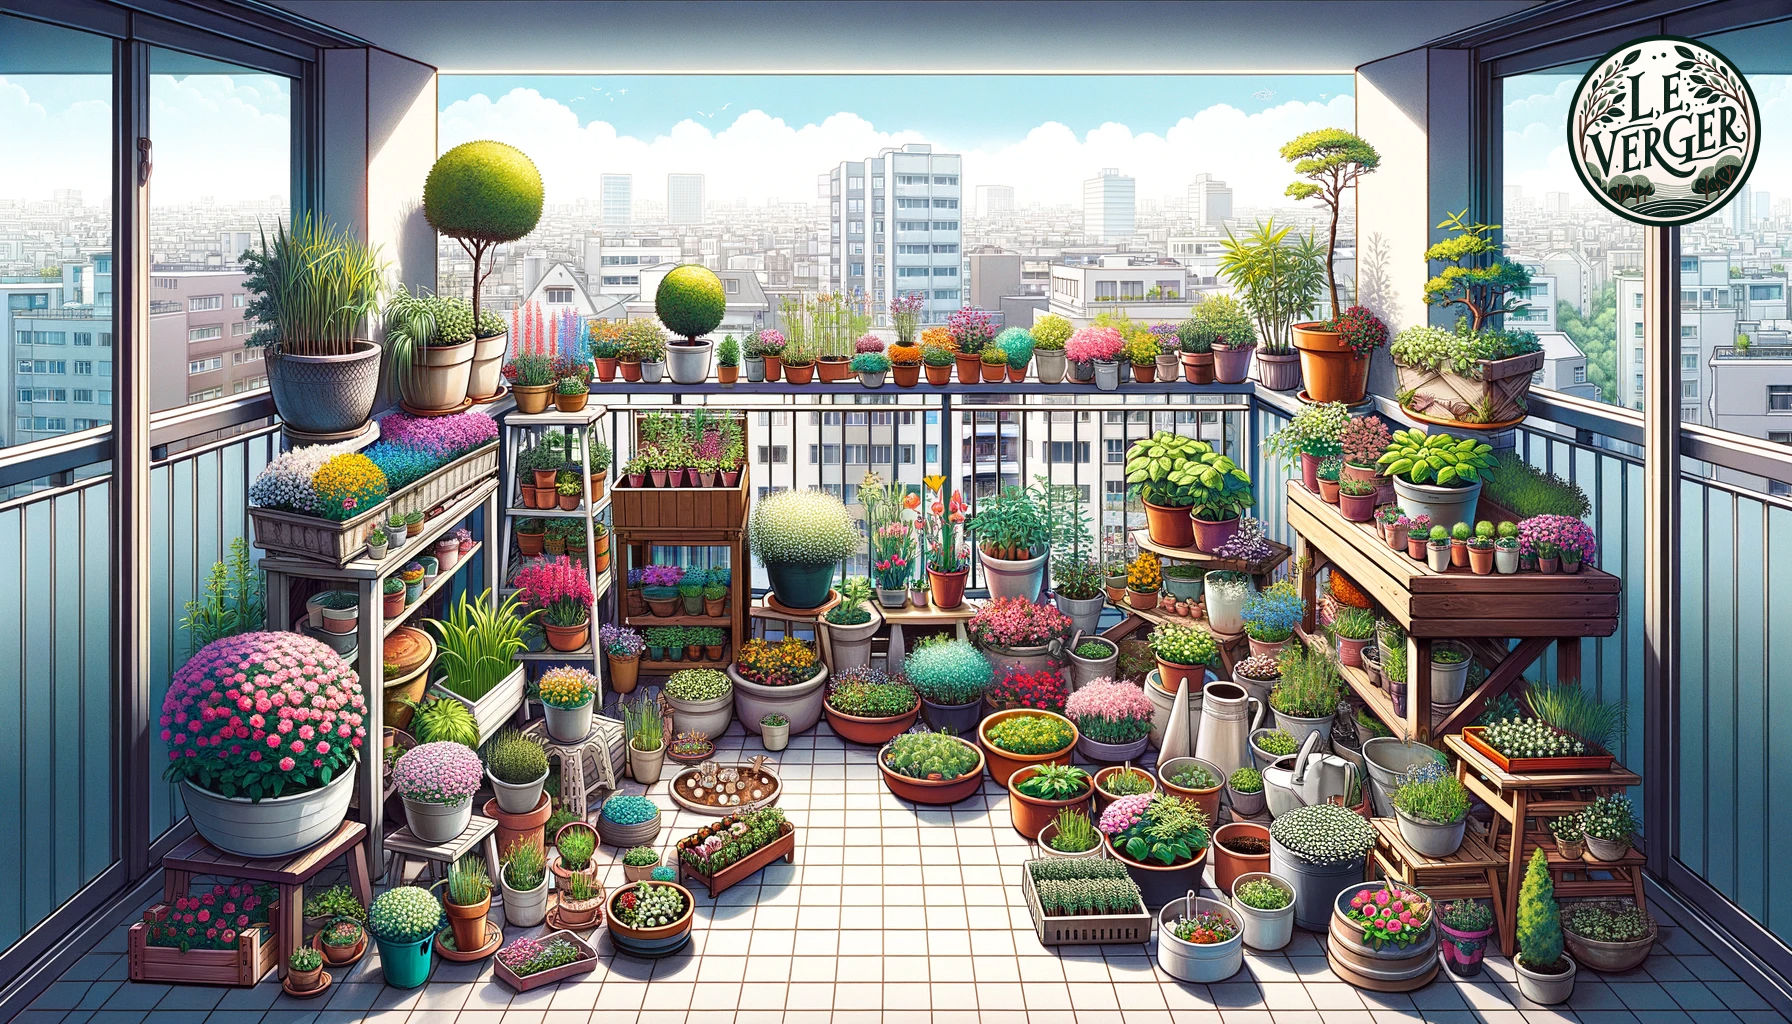 Illustration of a wide balcony scene displaying the beauty of container gardening. A variety of containers, pots, and planters are strategically placed. Some containers are brimming with vibrant flowers, while others house aromatic herbs. A few larger pots contain budding vegetables, and a couple of planters showcase young, small trees. The scene embodies the essence of nature in a restricted space.